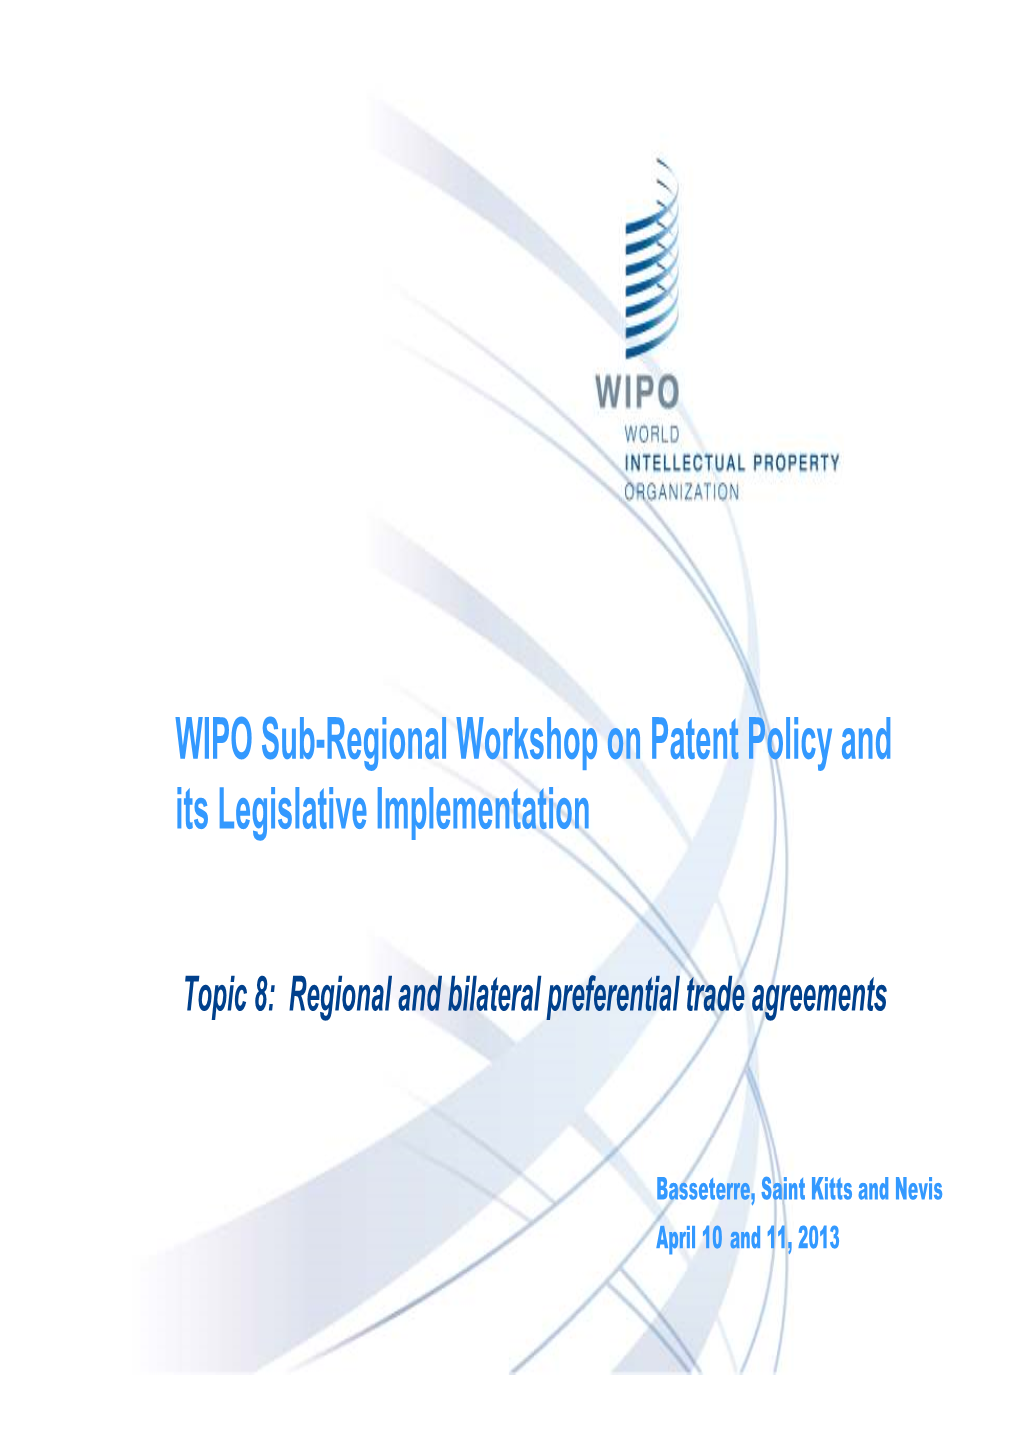 WIPO Sub-Regional Workshop on Patent Policy and Its Legislative Implementation